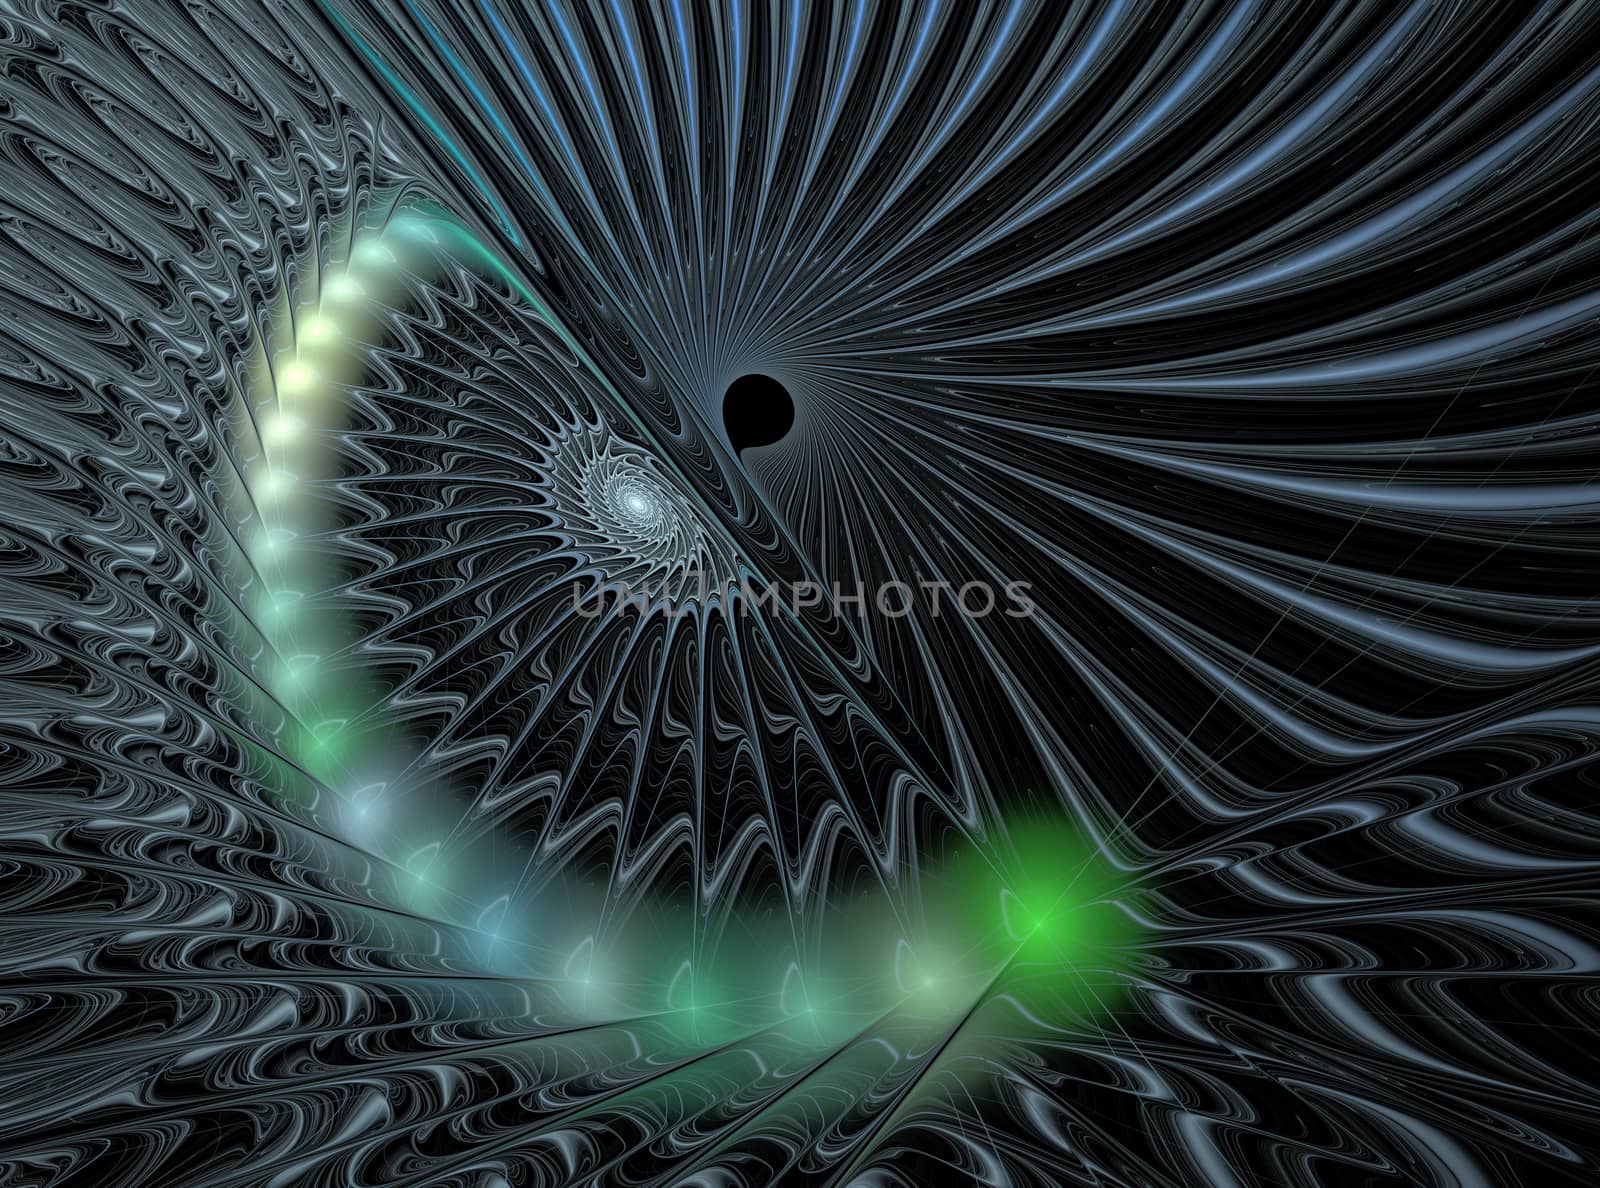 An abstract computer generated modern fractal design on dark background. Abstract fractal color texture. Digital art. Abstract Form & Colors. Grey shiny spiral pattern around black hole